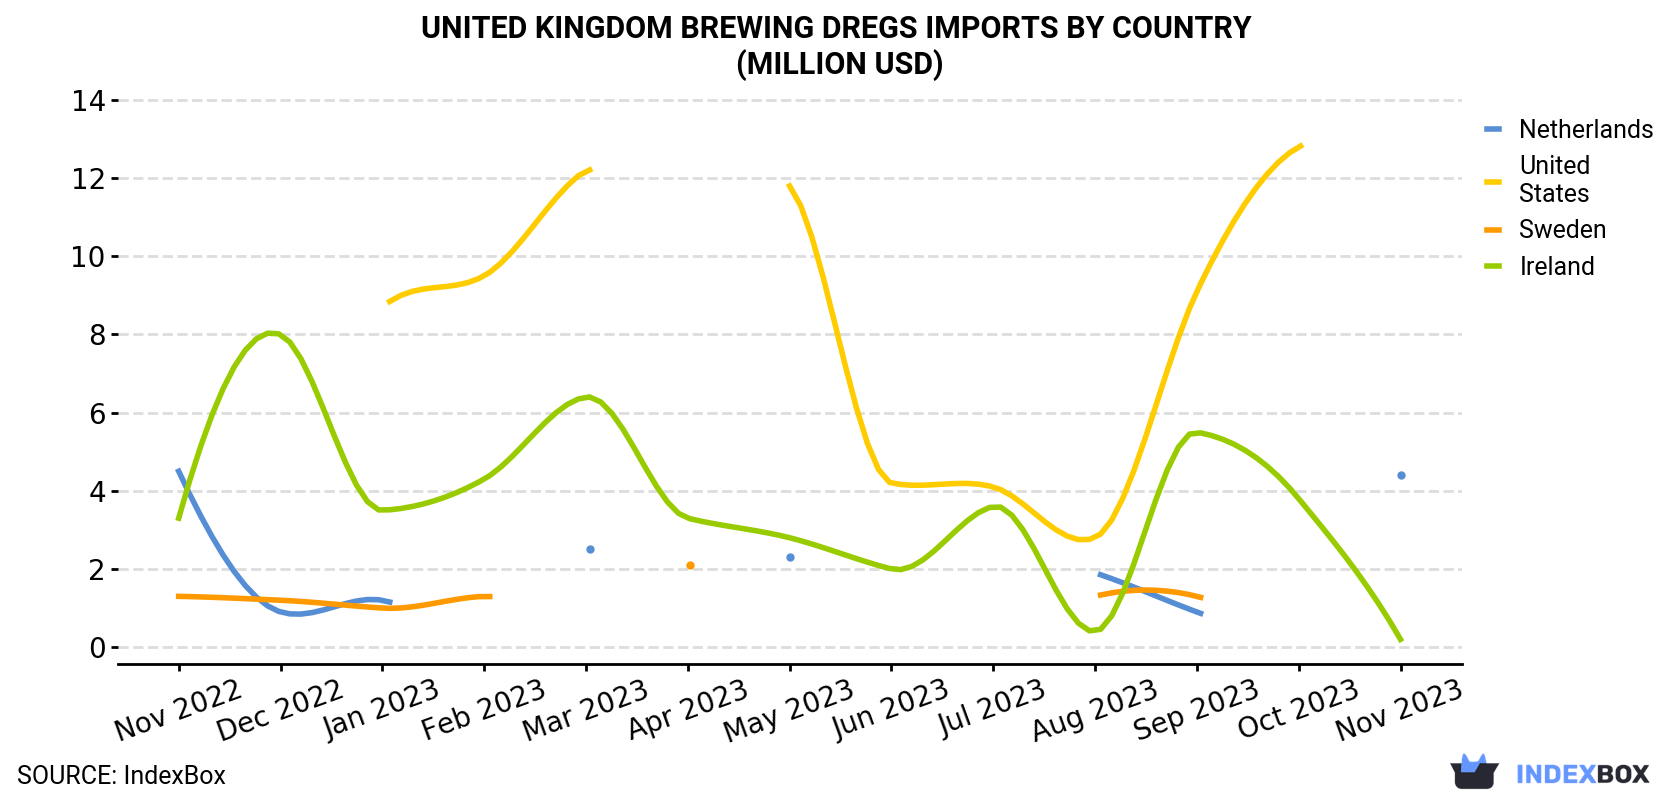 United Kingdom Brewing Dregs Imports By Country (Million USD)